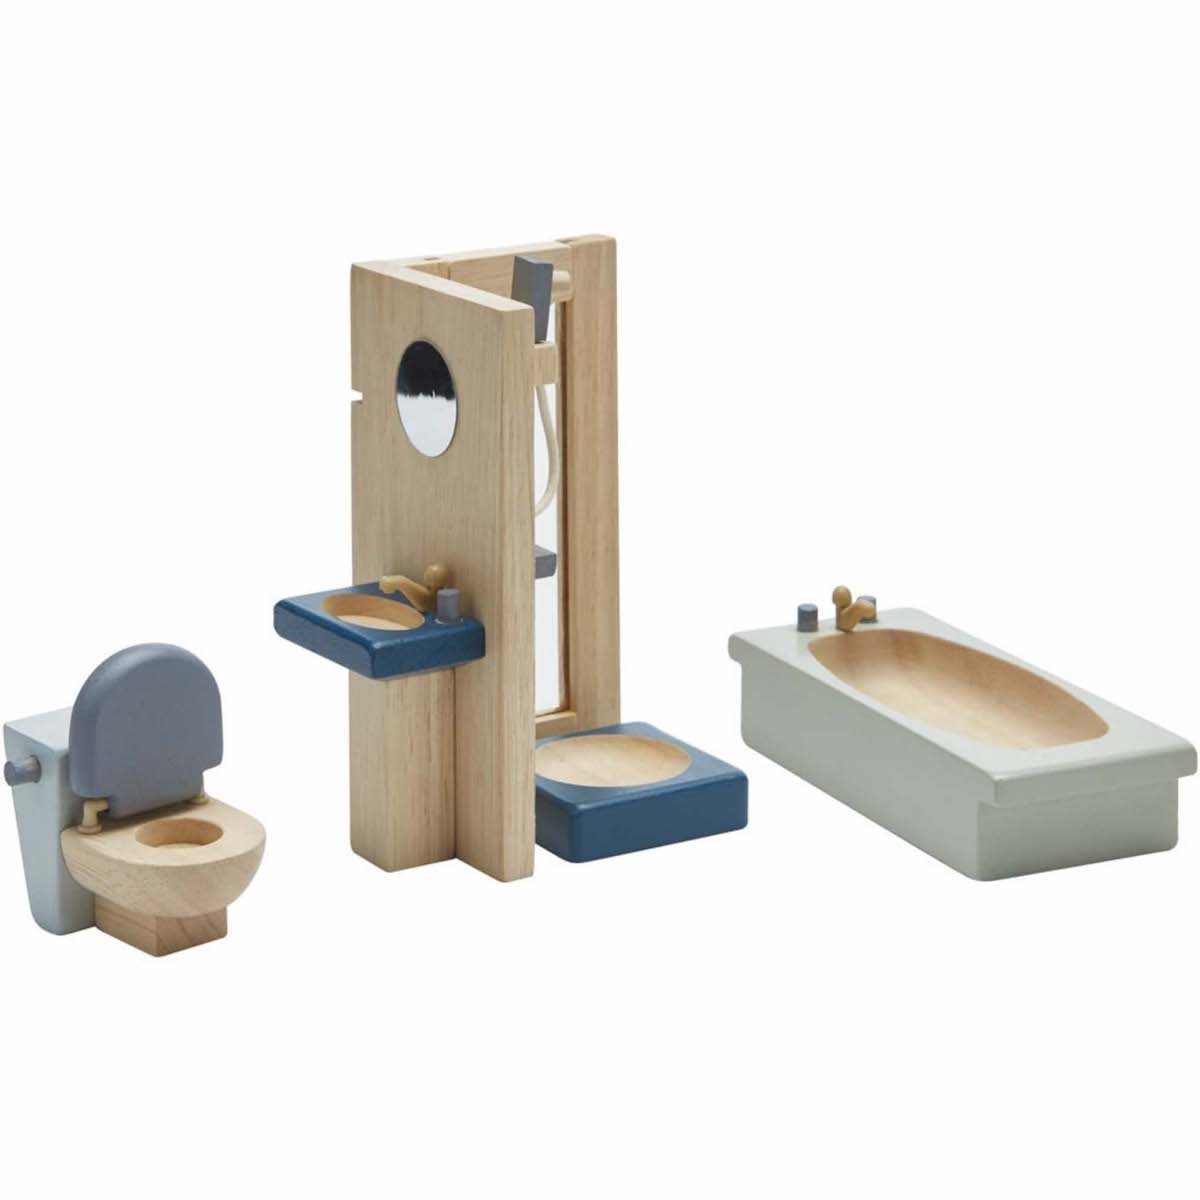 Plan Toys Bathroom House Furniture - Orchard Collection 7356